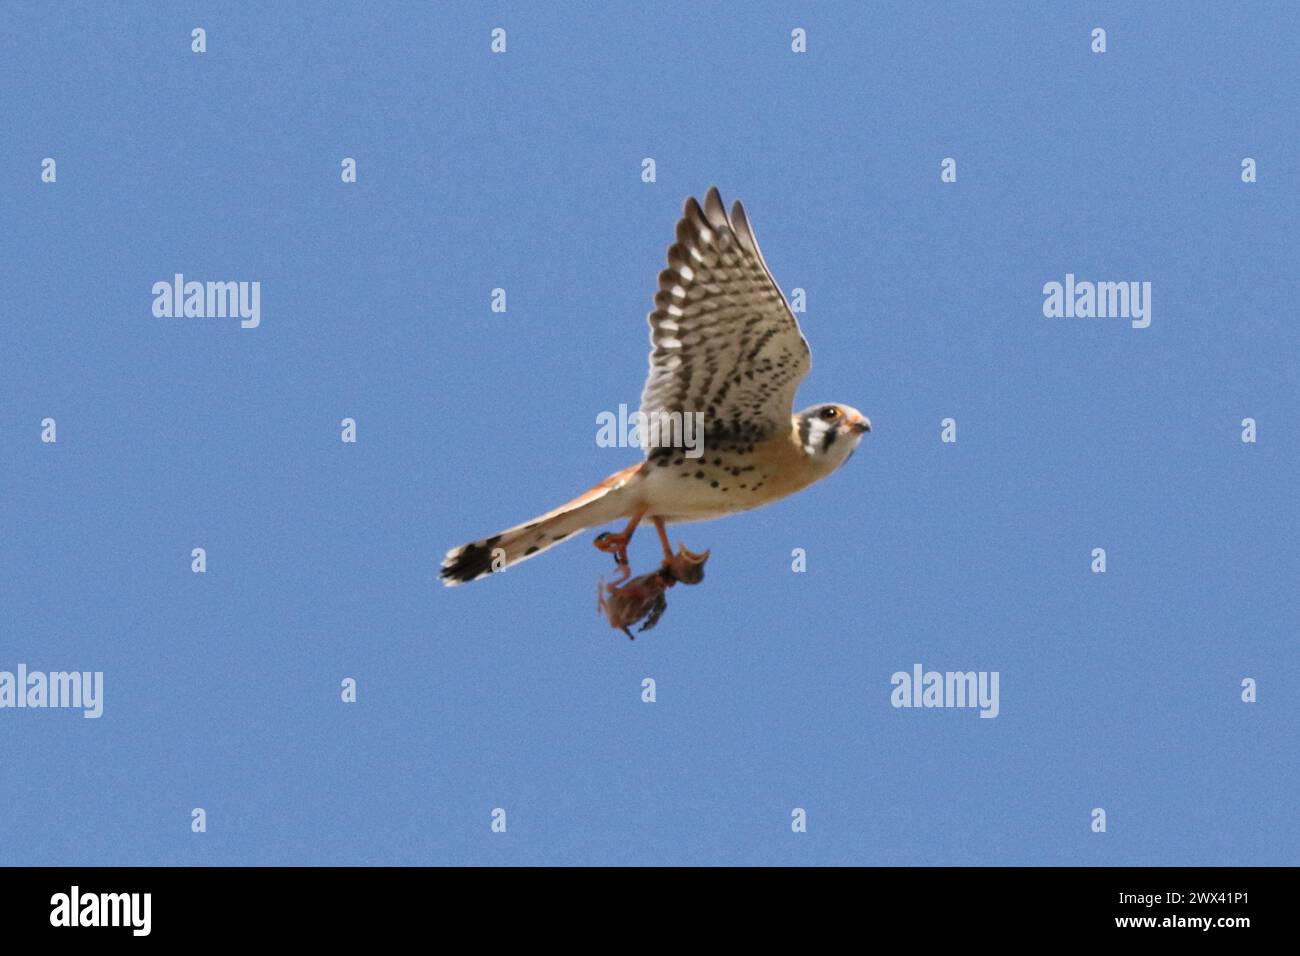 An American Kestrel takes off with a baby bird Stock Photo